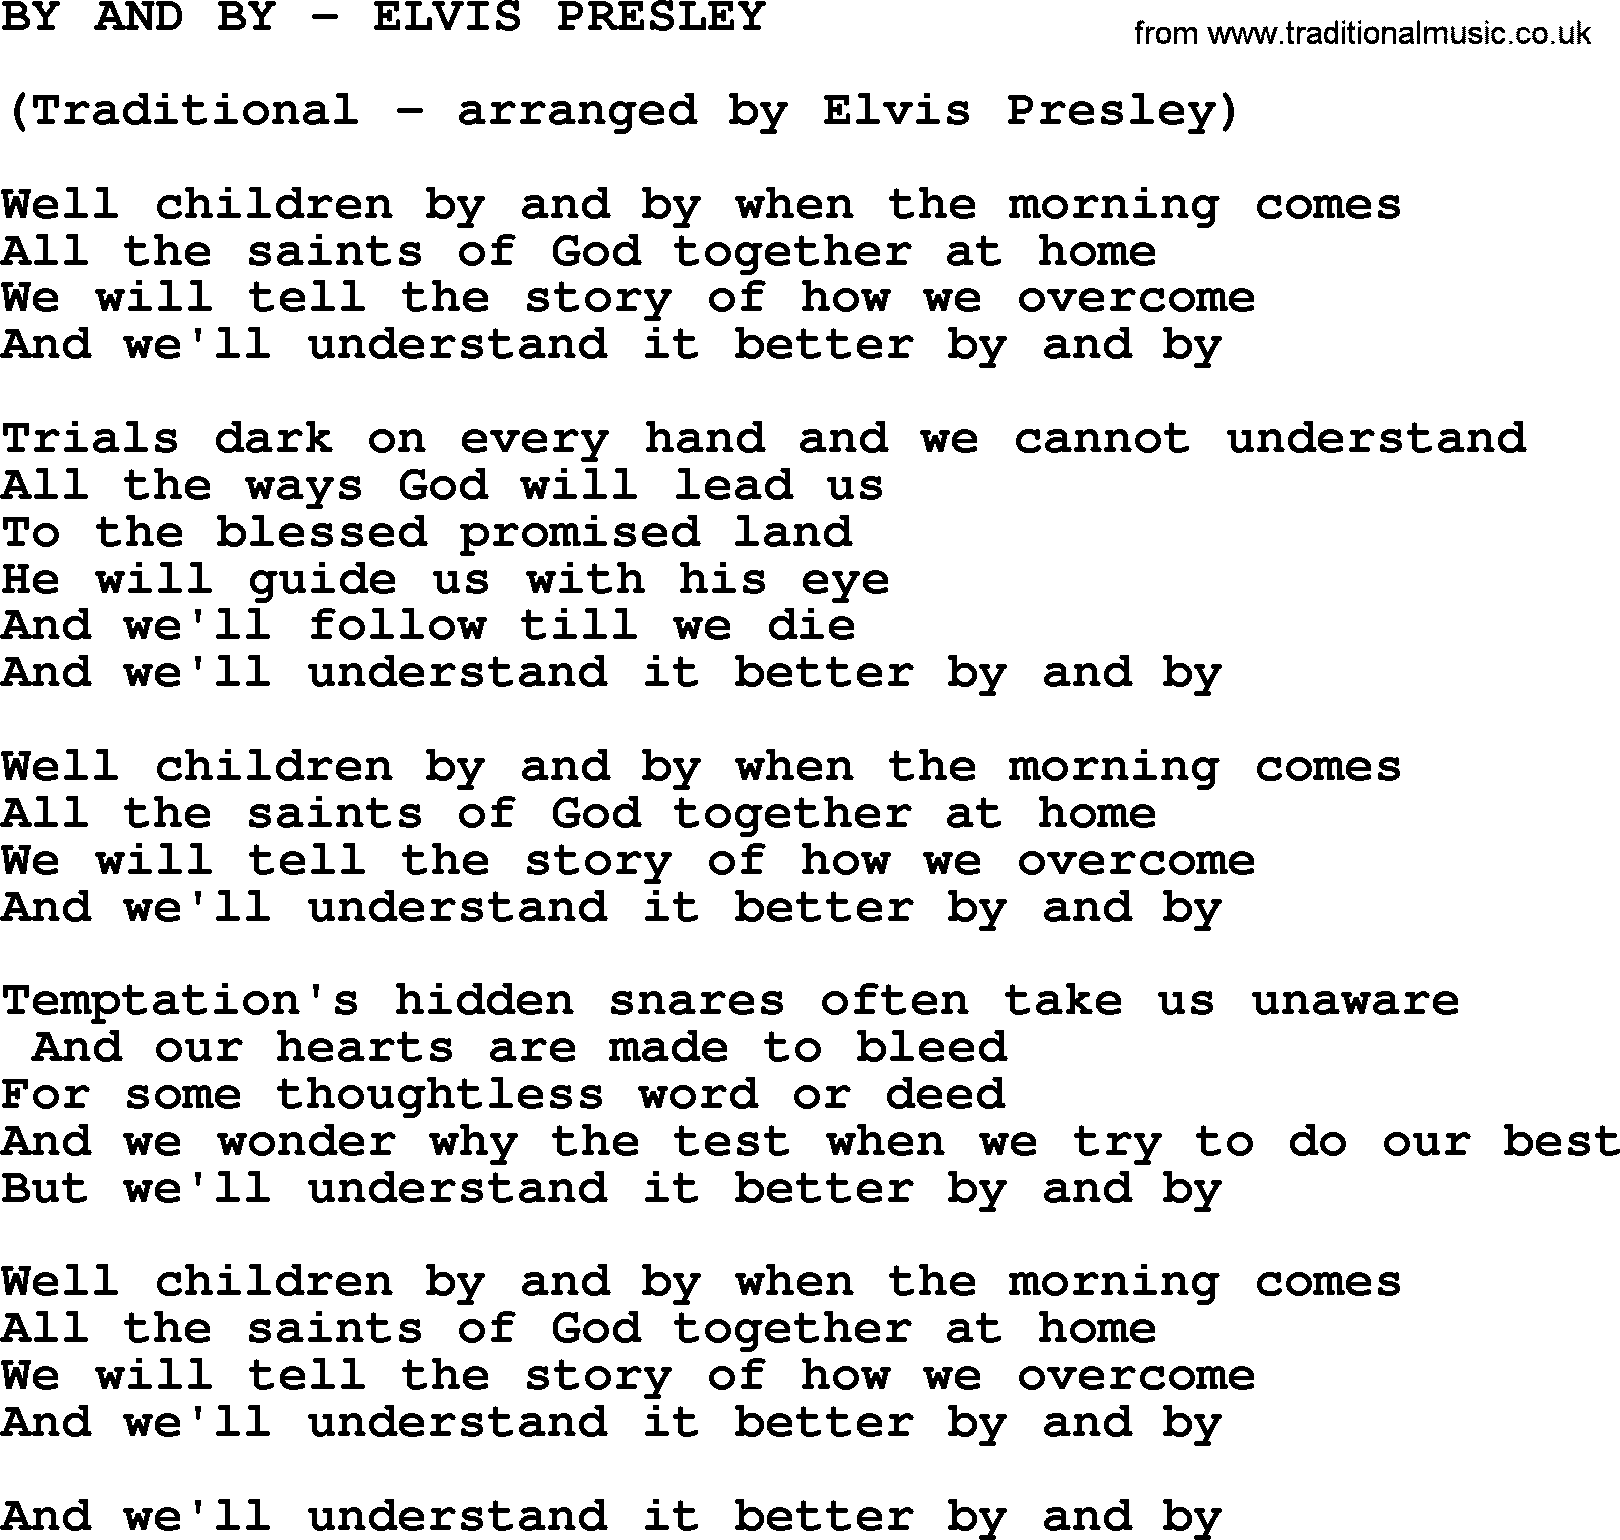 Elvis Presley song: By And By-Elvis Presley-.txt lyrics and chords